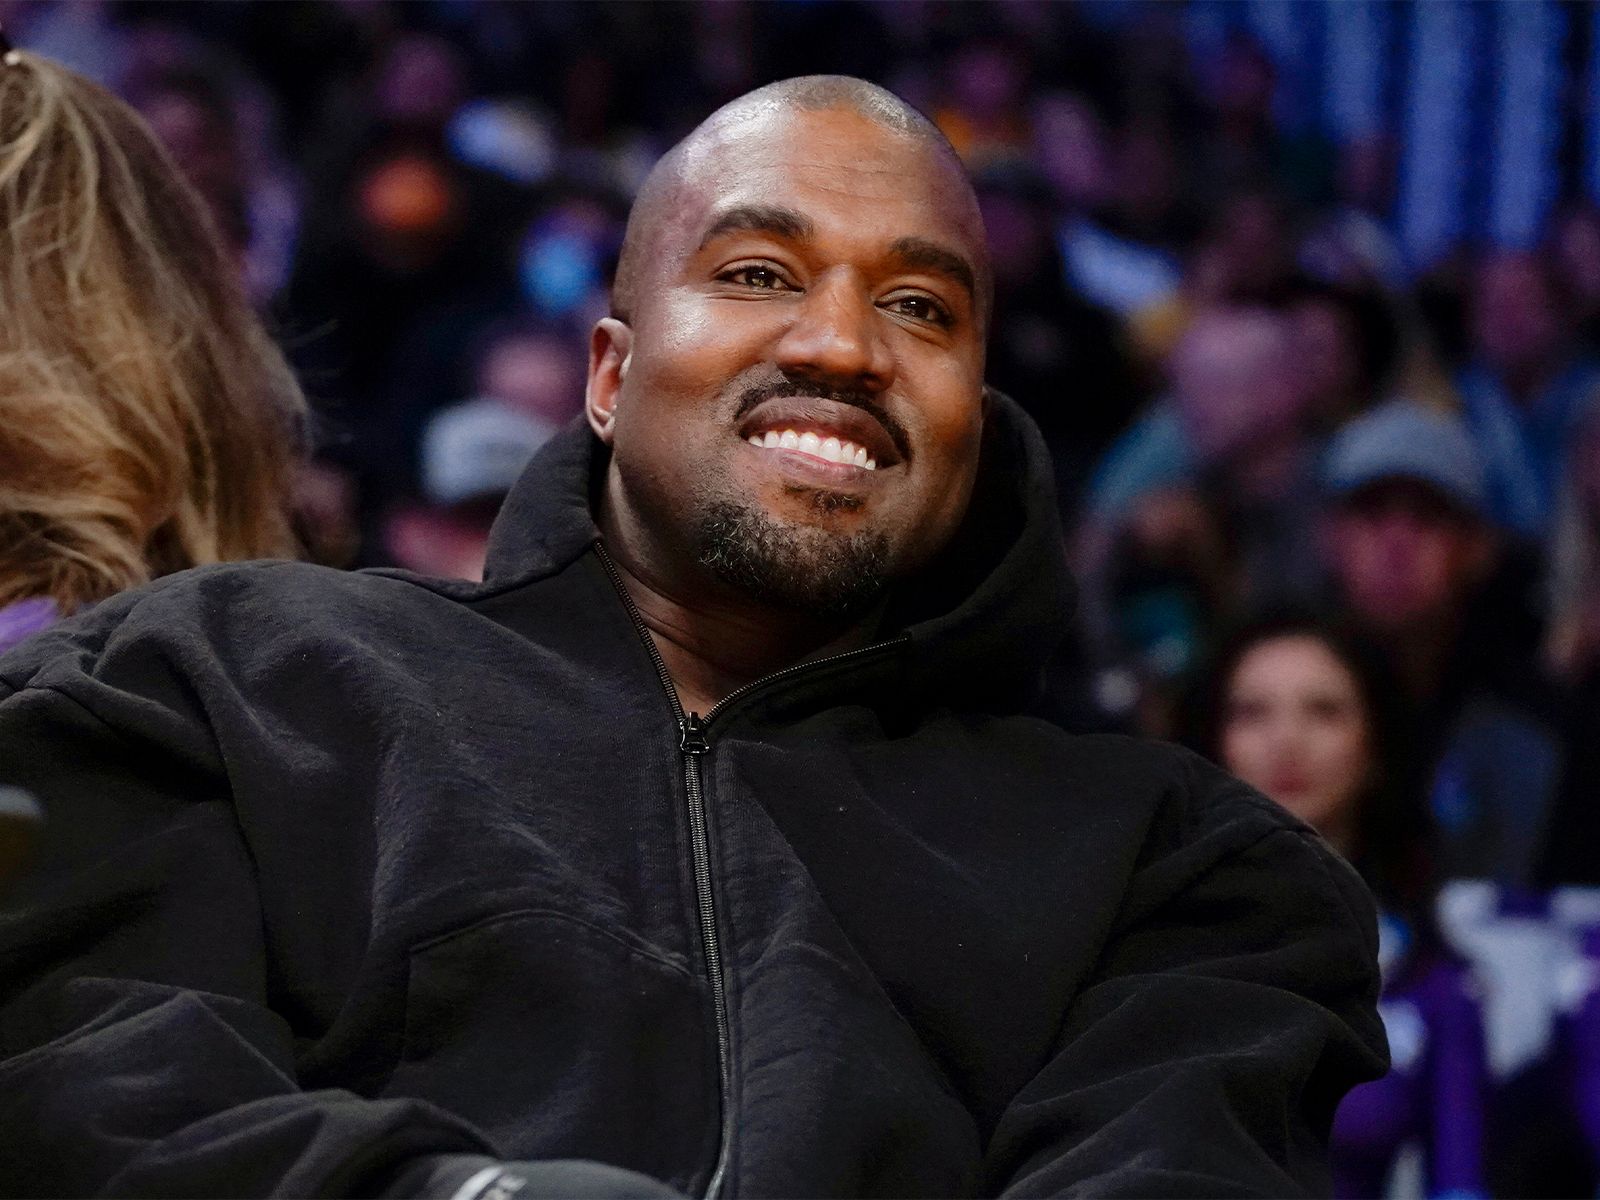 adidas and Kanye West may have reached a deal